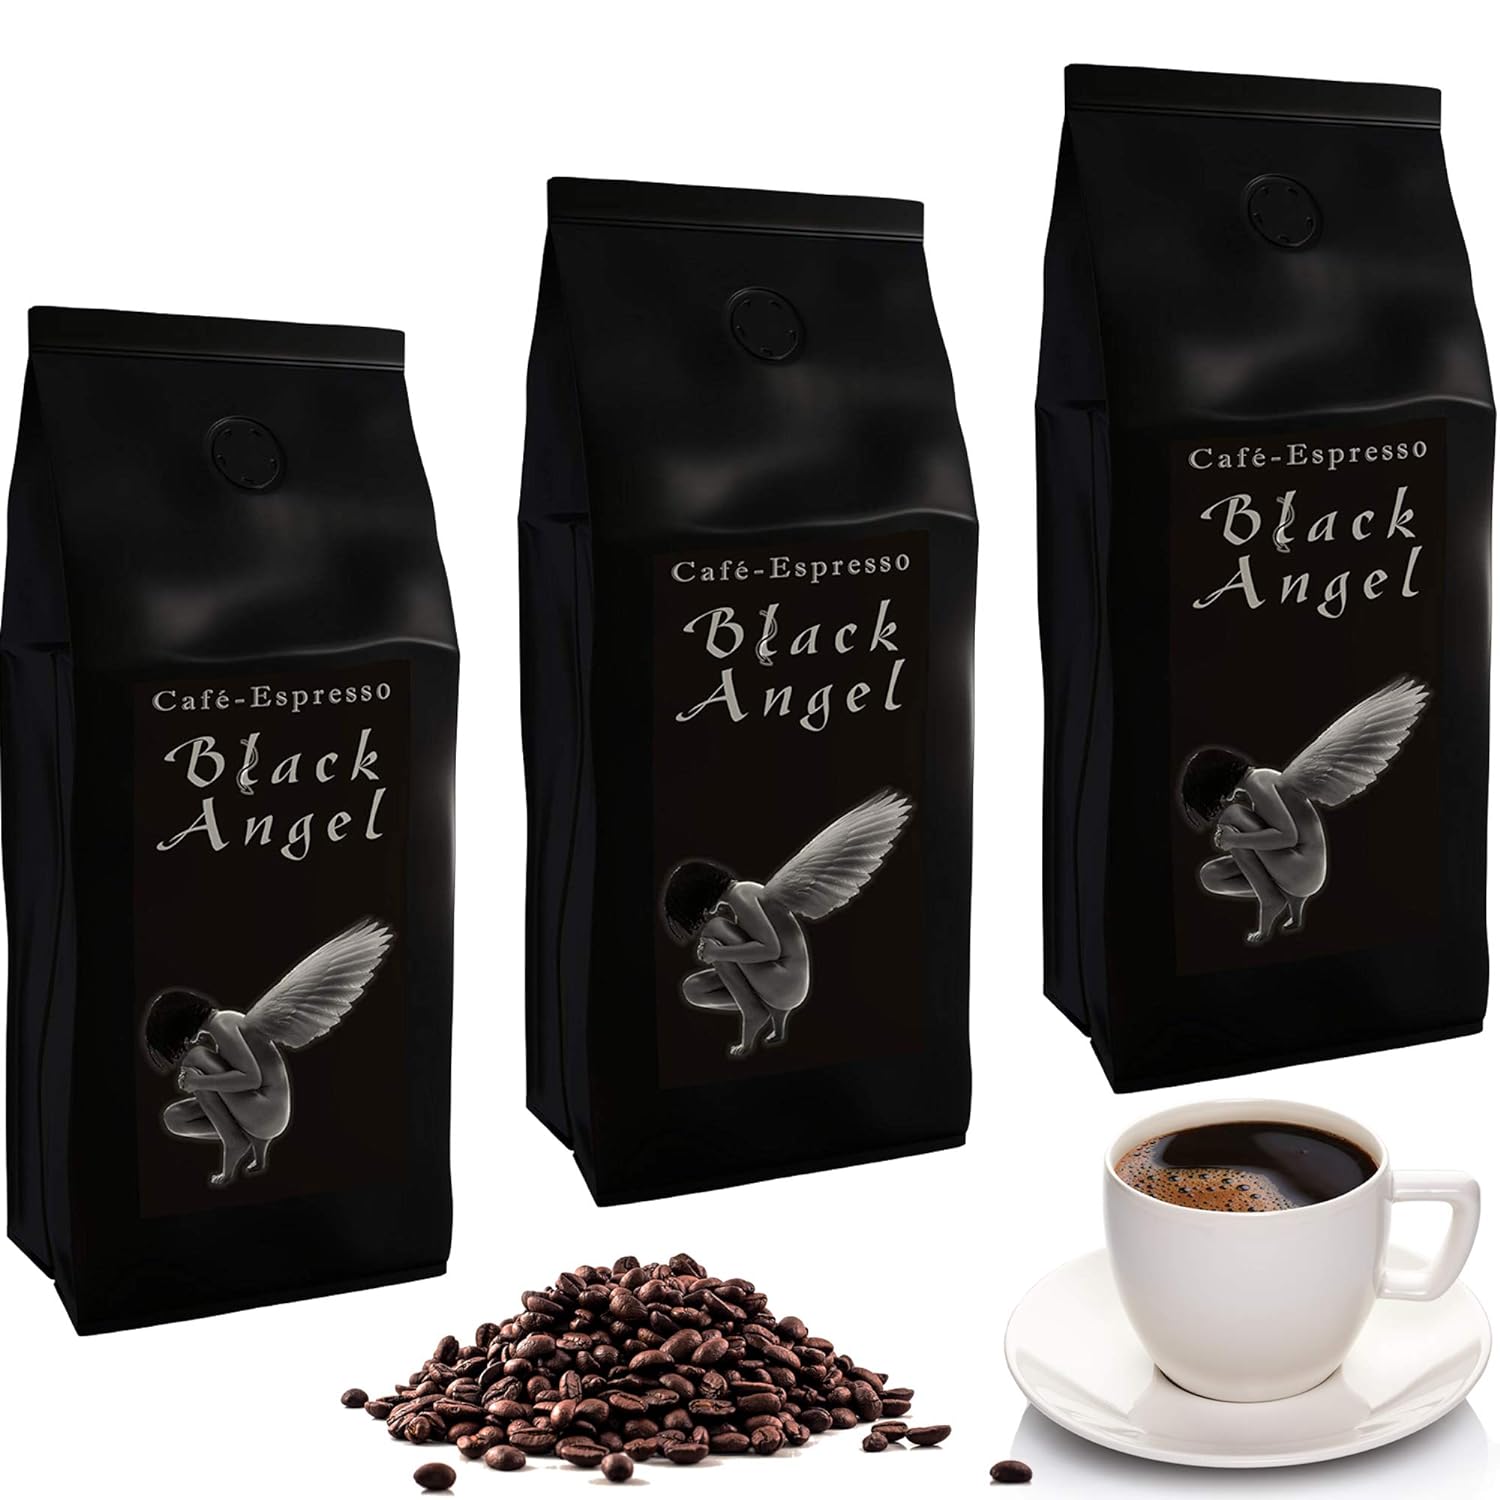 C&T Black Angel Espresso Deluxe 3 x 1000 g Whole Coffee Beans Strong Top Coffee From our Popular Espresso Angel Series